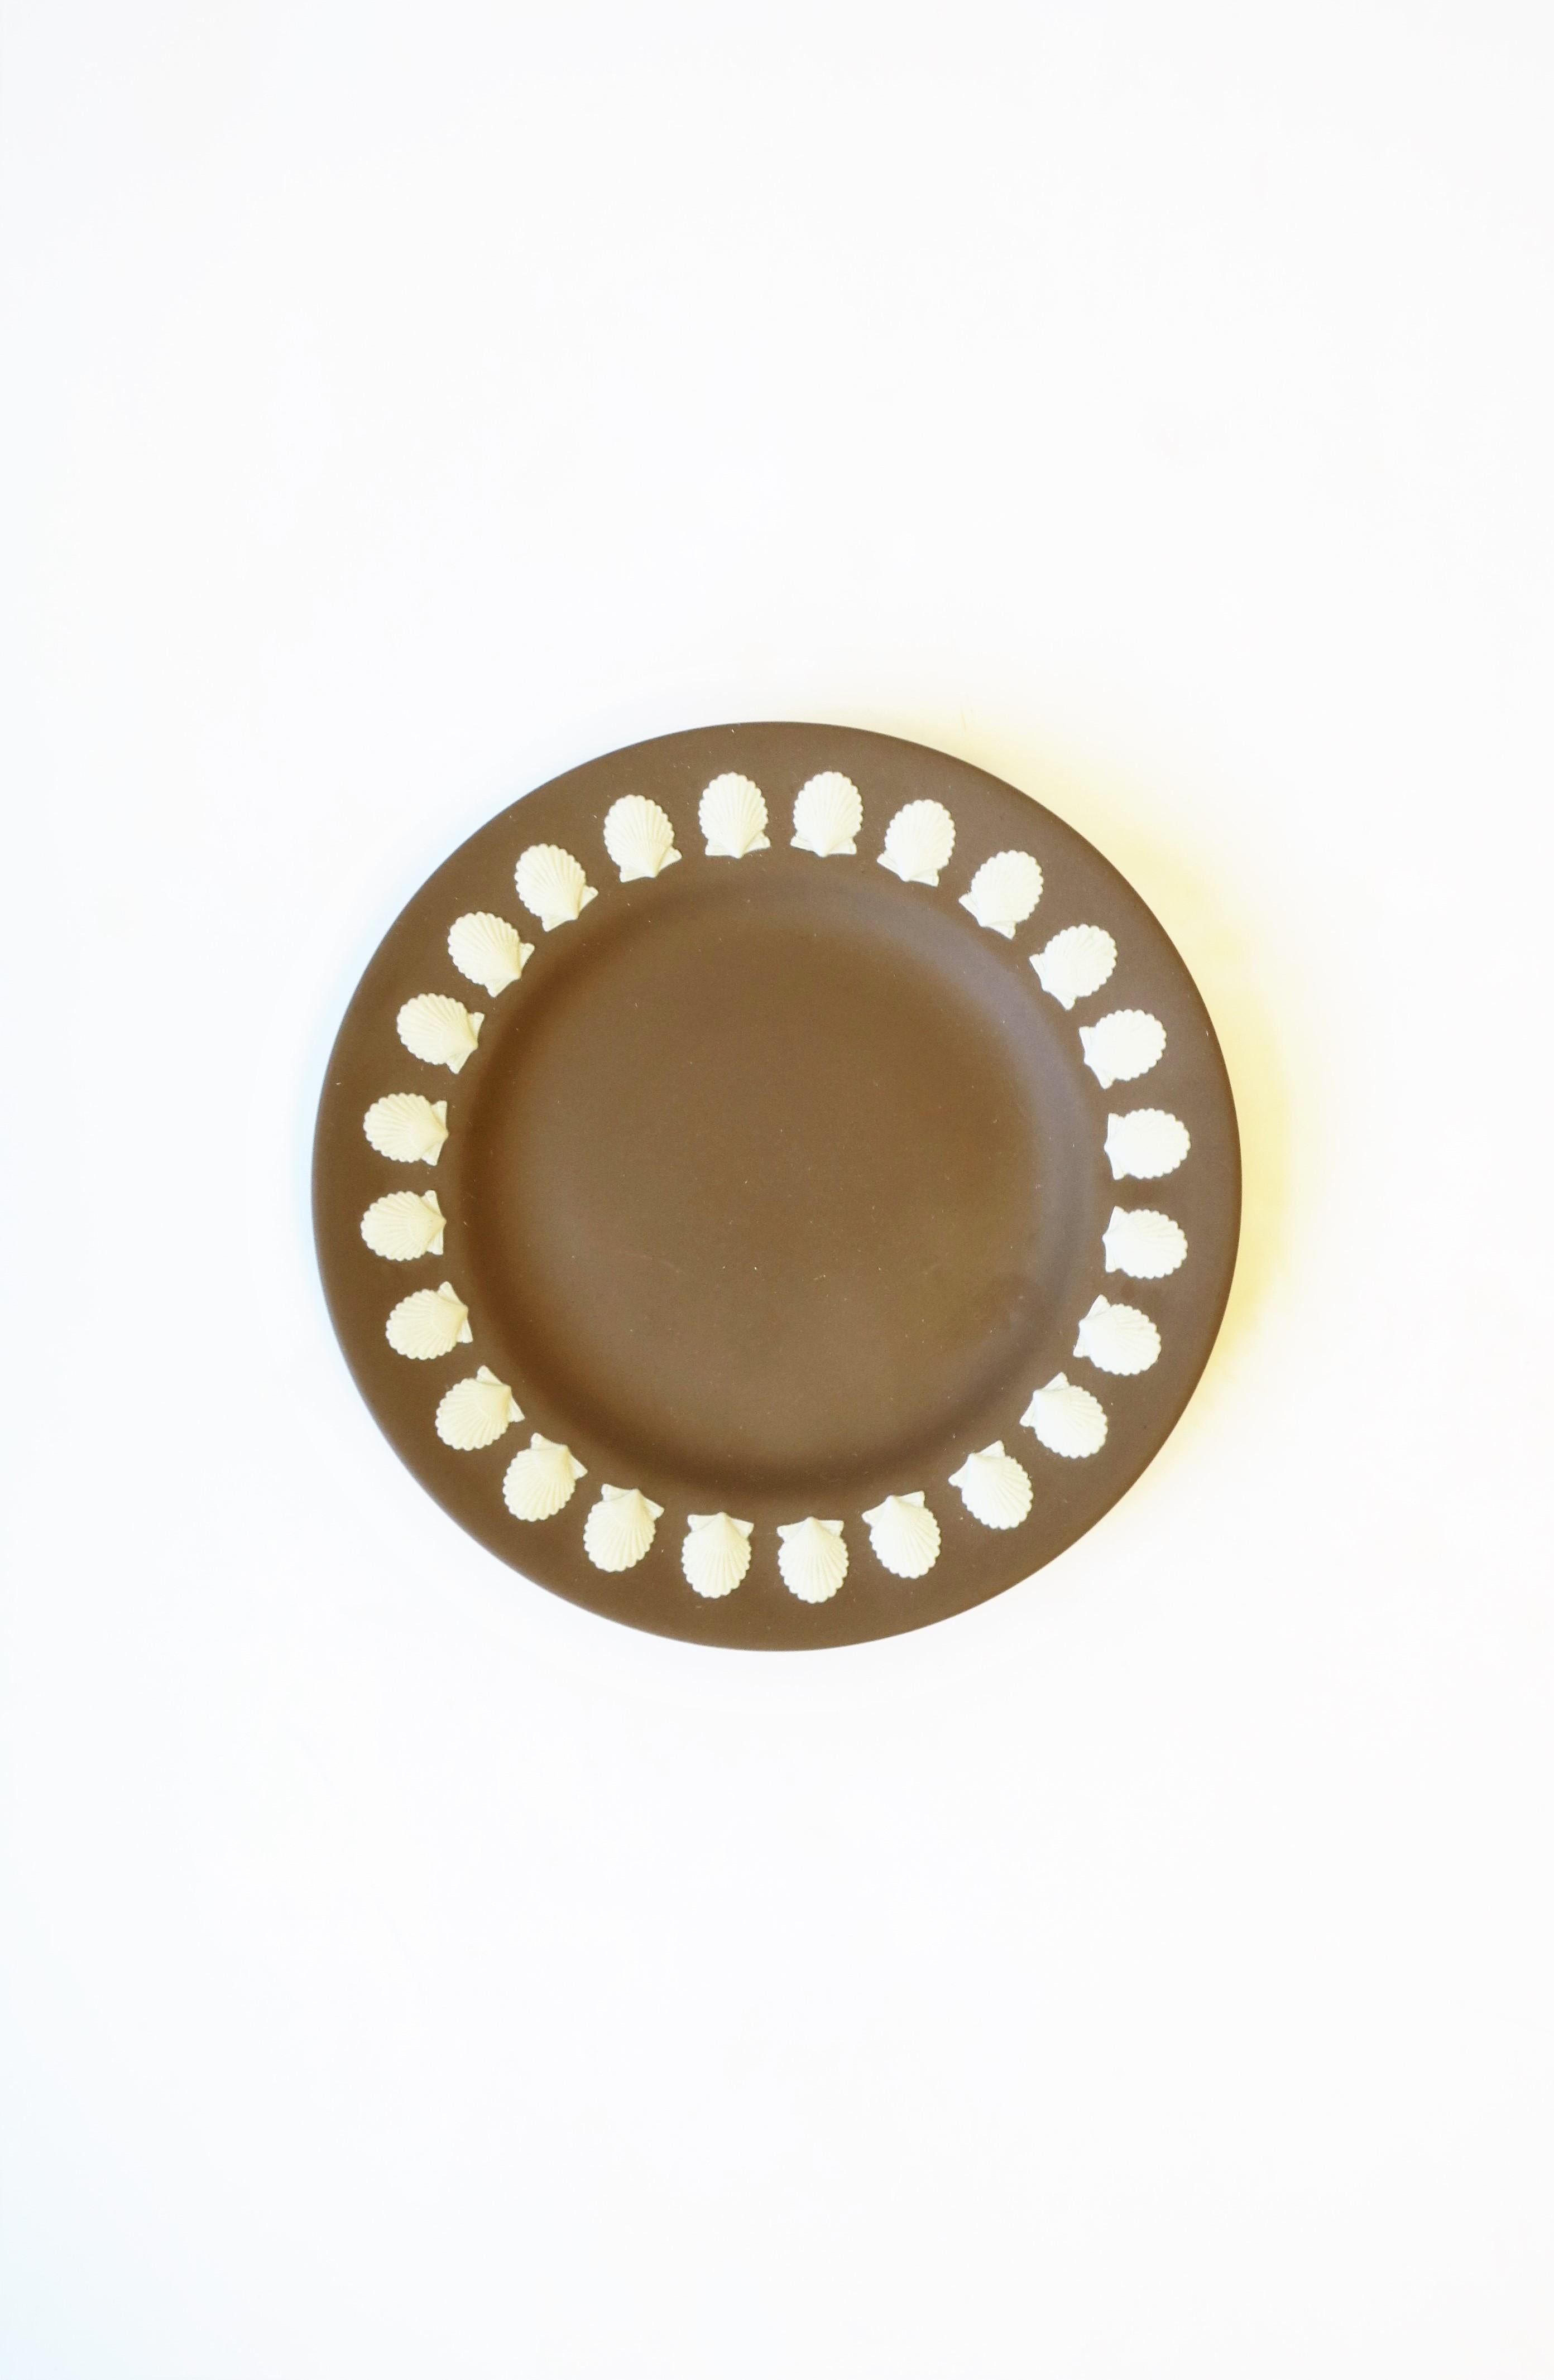 A beautiful English Wedgwood Jasperware plate or dish with scallop seashell design, circa 20th century, England. This piece is a matte stoneware in mocha brown or light brown with a white scallop seashell design around edge. Beautiful as a